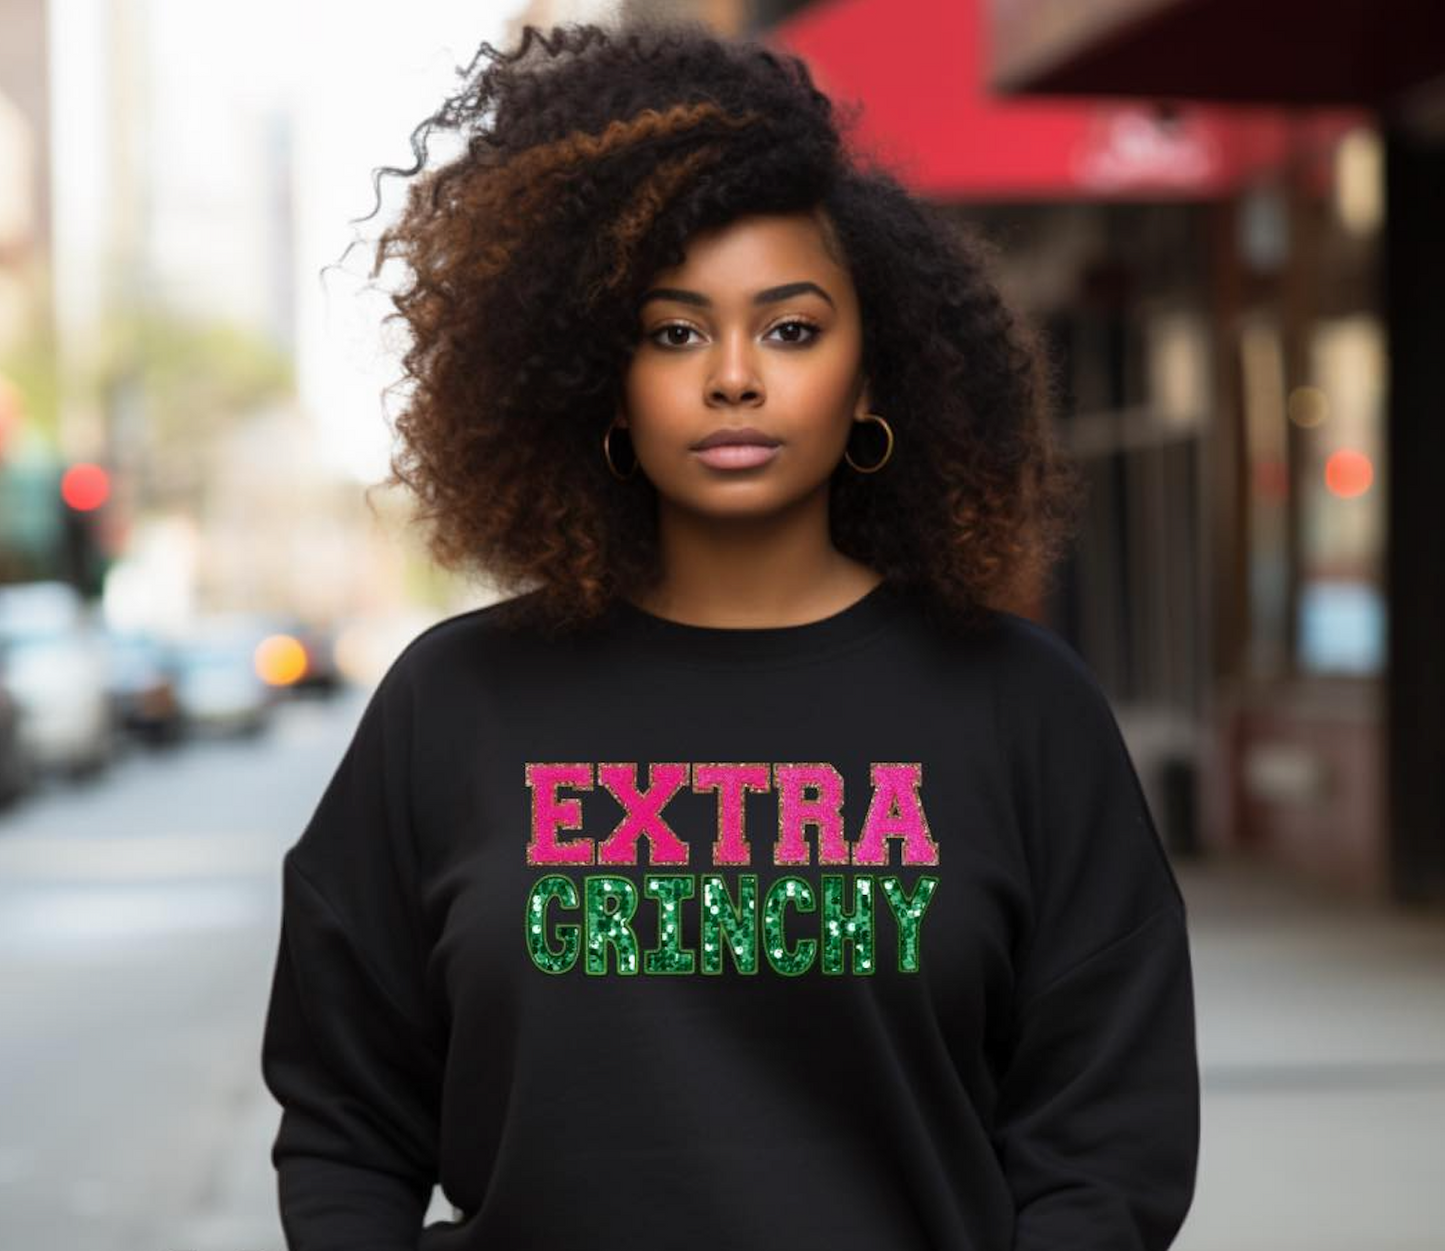 Extra Grinchy Pink Green Black Crewneck Sweater Unisex - Prominent Styles of Sorts- PSS!